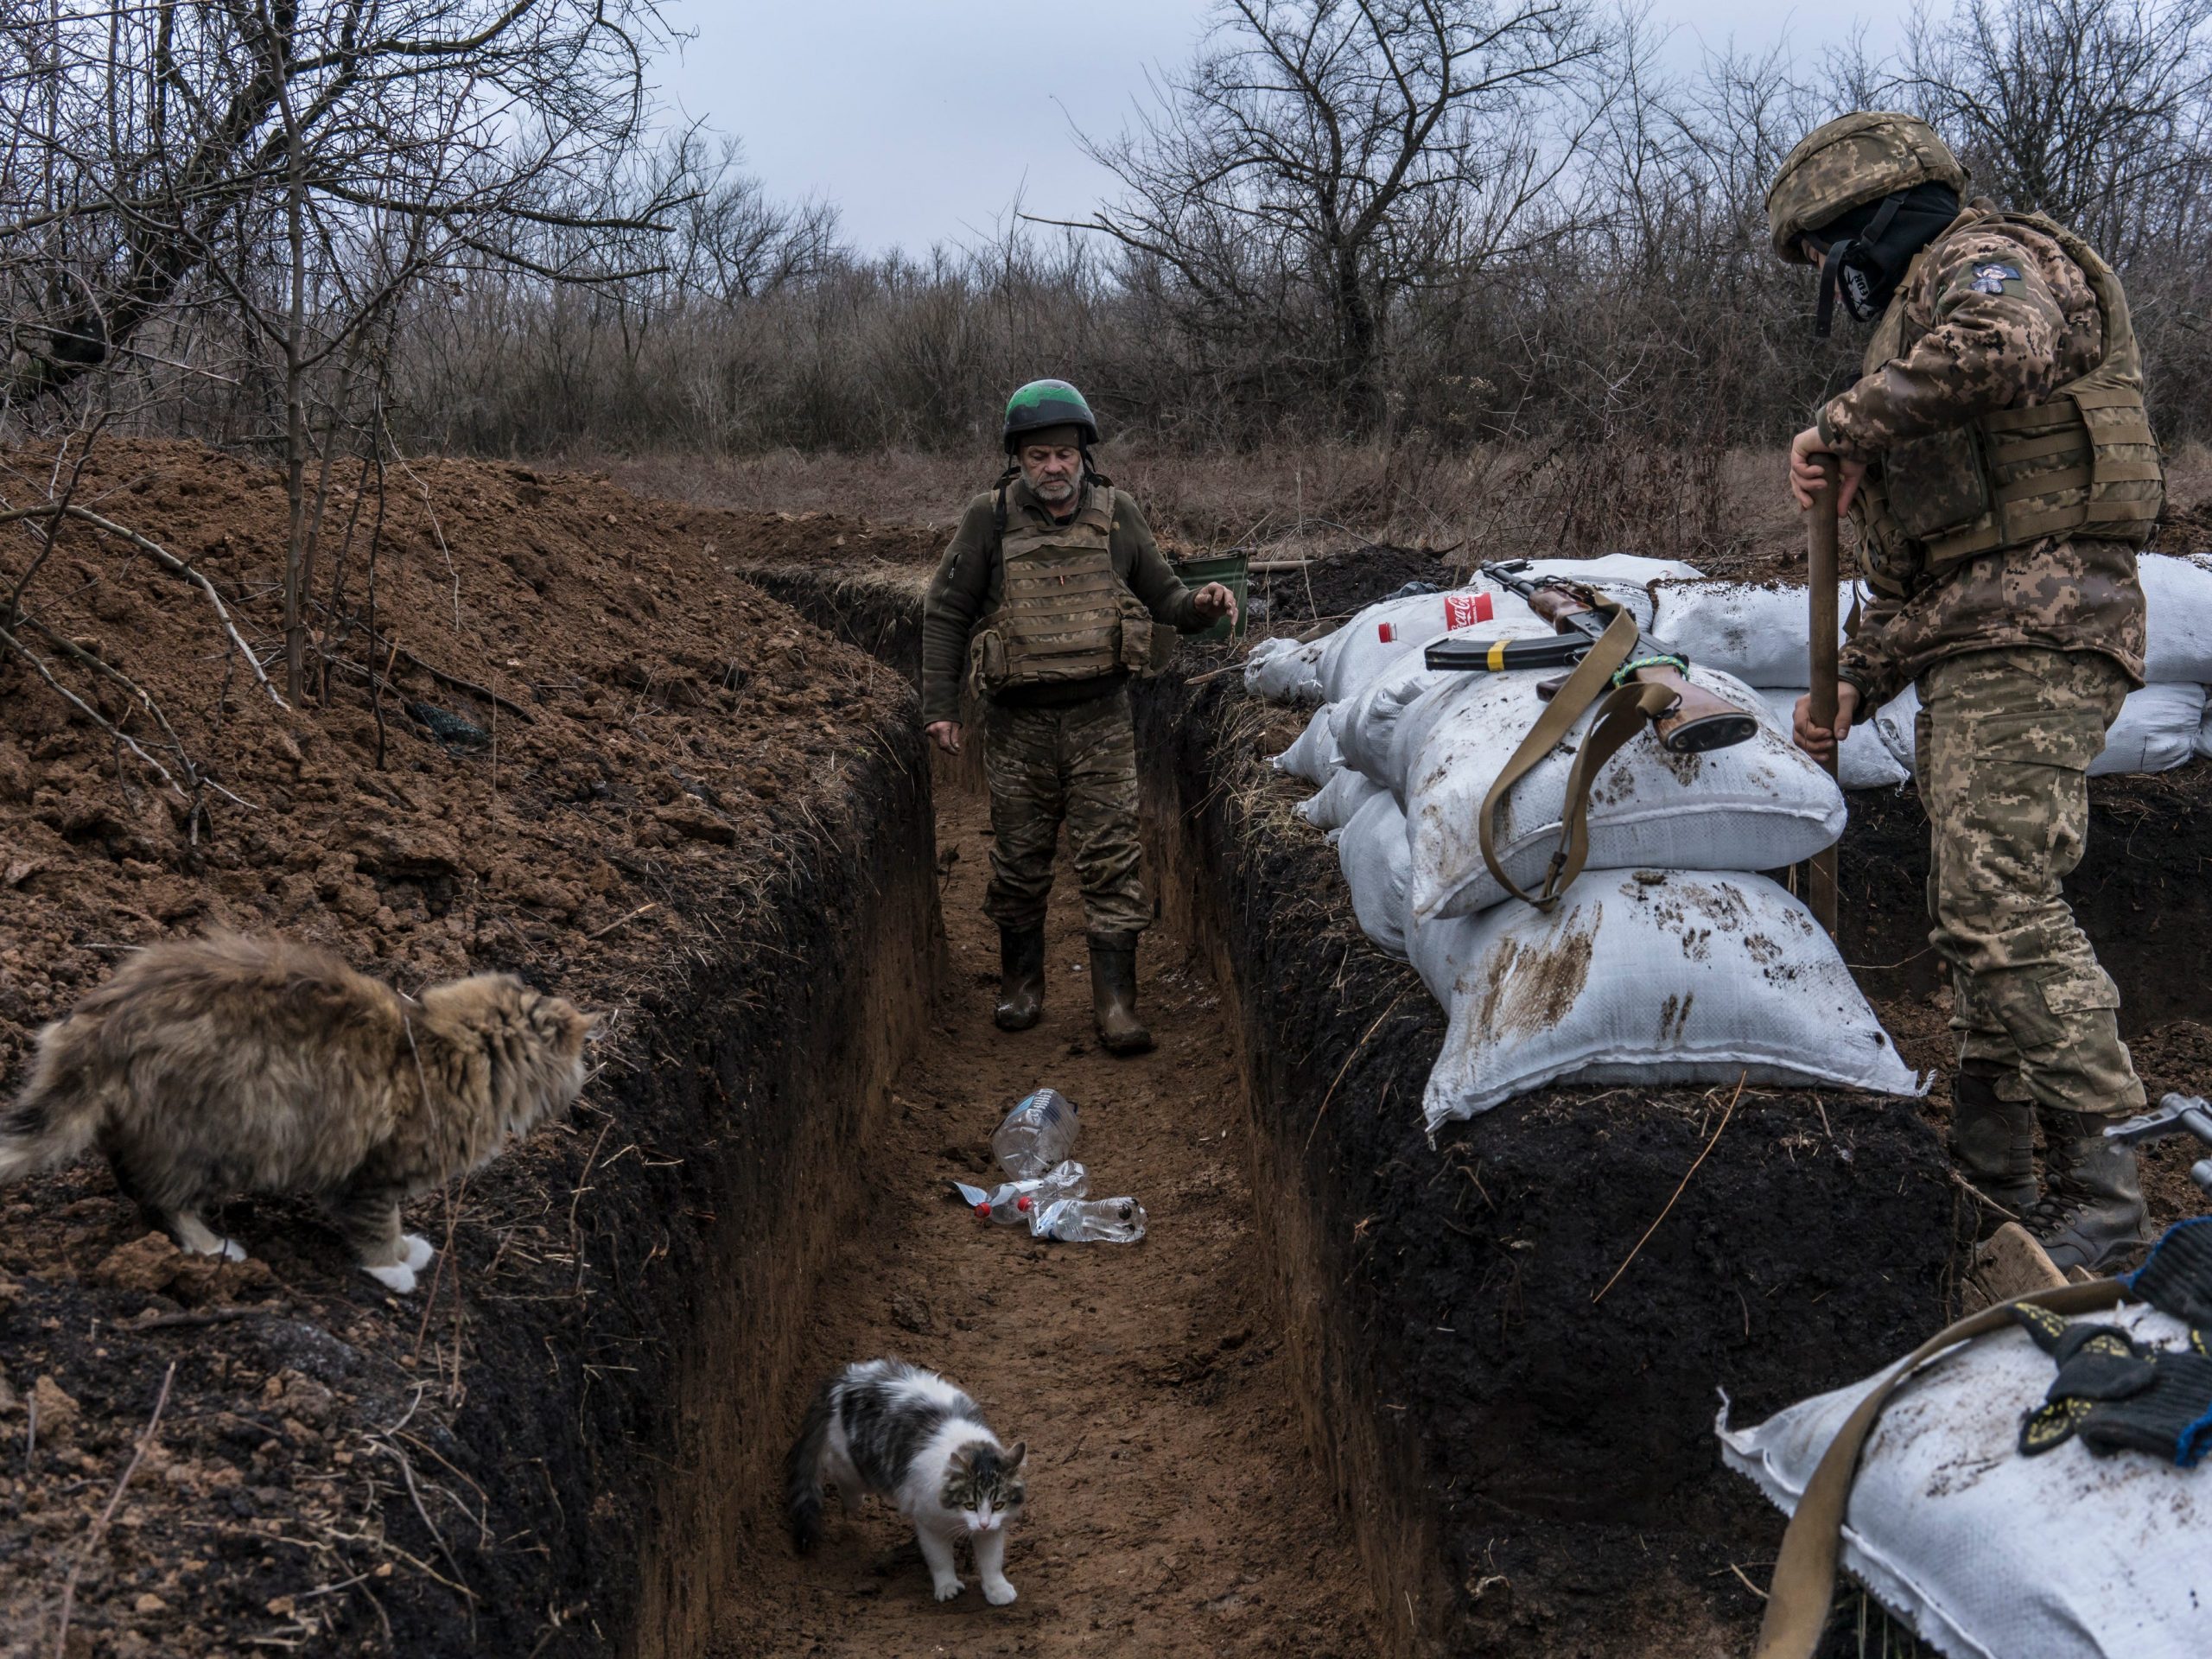 Ukrainian soldiers Mykhailo (L) and Pavlo builds a bunker on the front line on December 12, 2021 in Zolote, Ukraine.